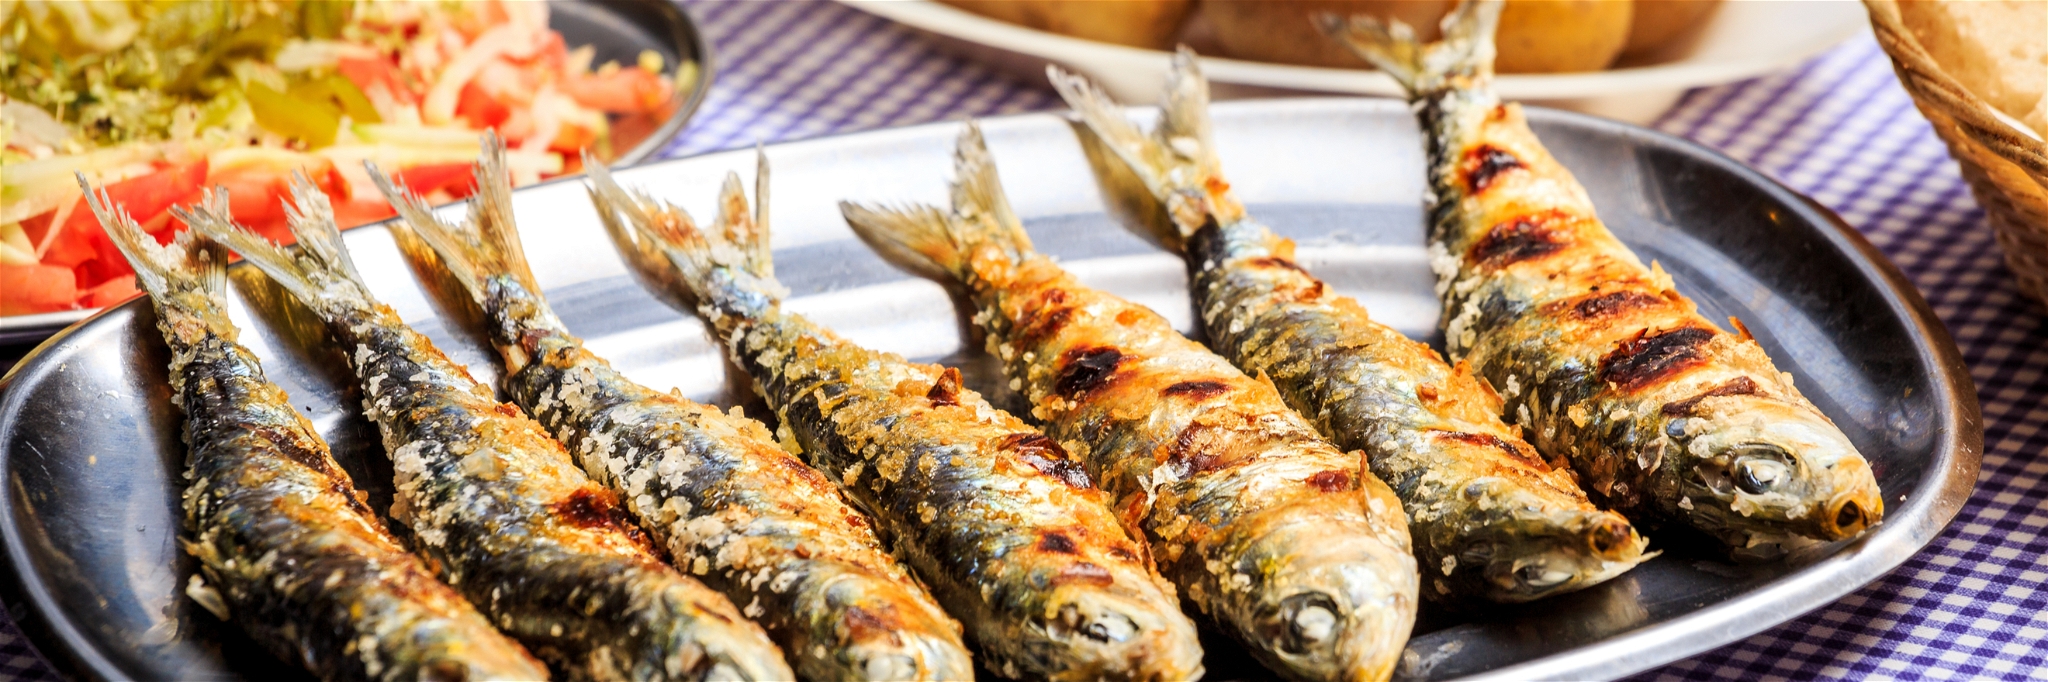 Channel that holiday vibe with a plate of sardines.